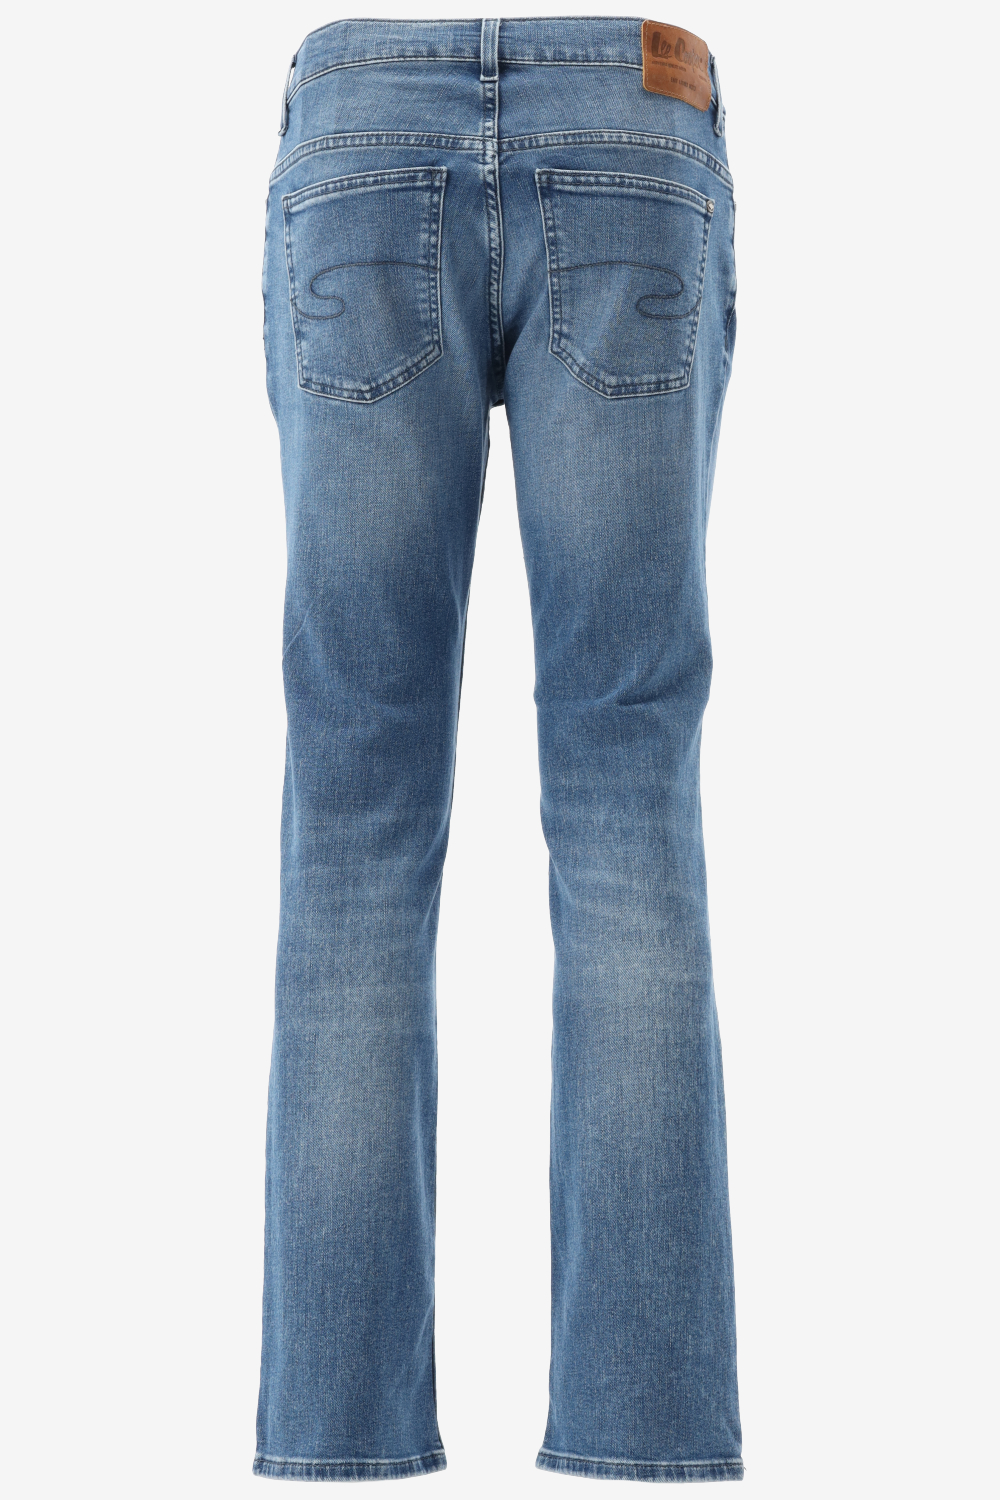 Lee Cooper Bootcut  AUTHENTIC